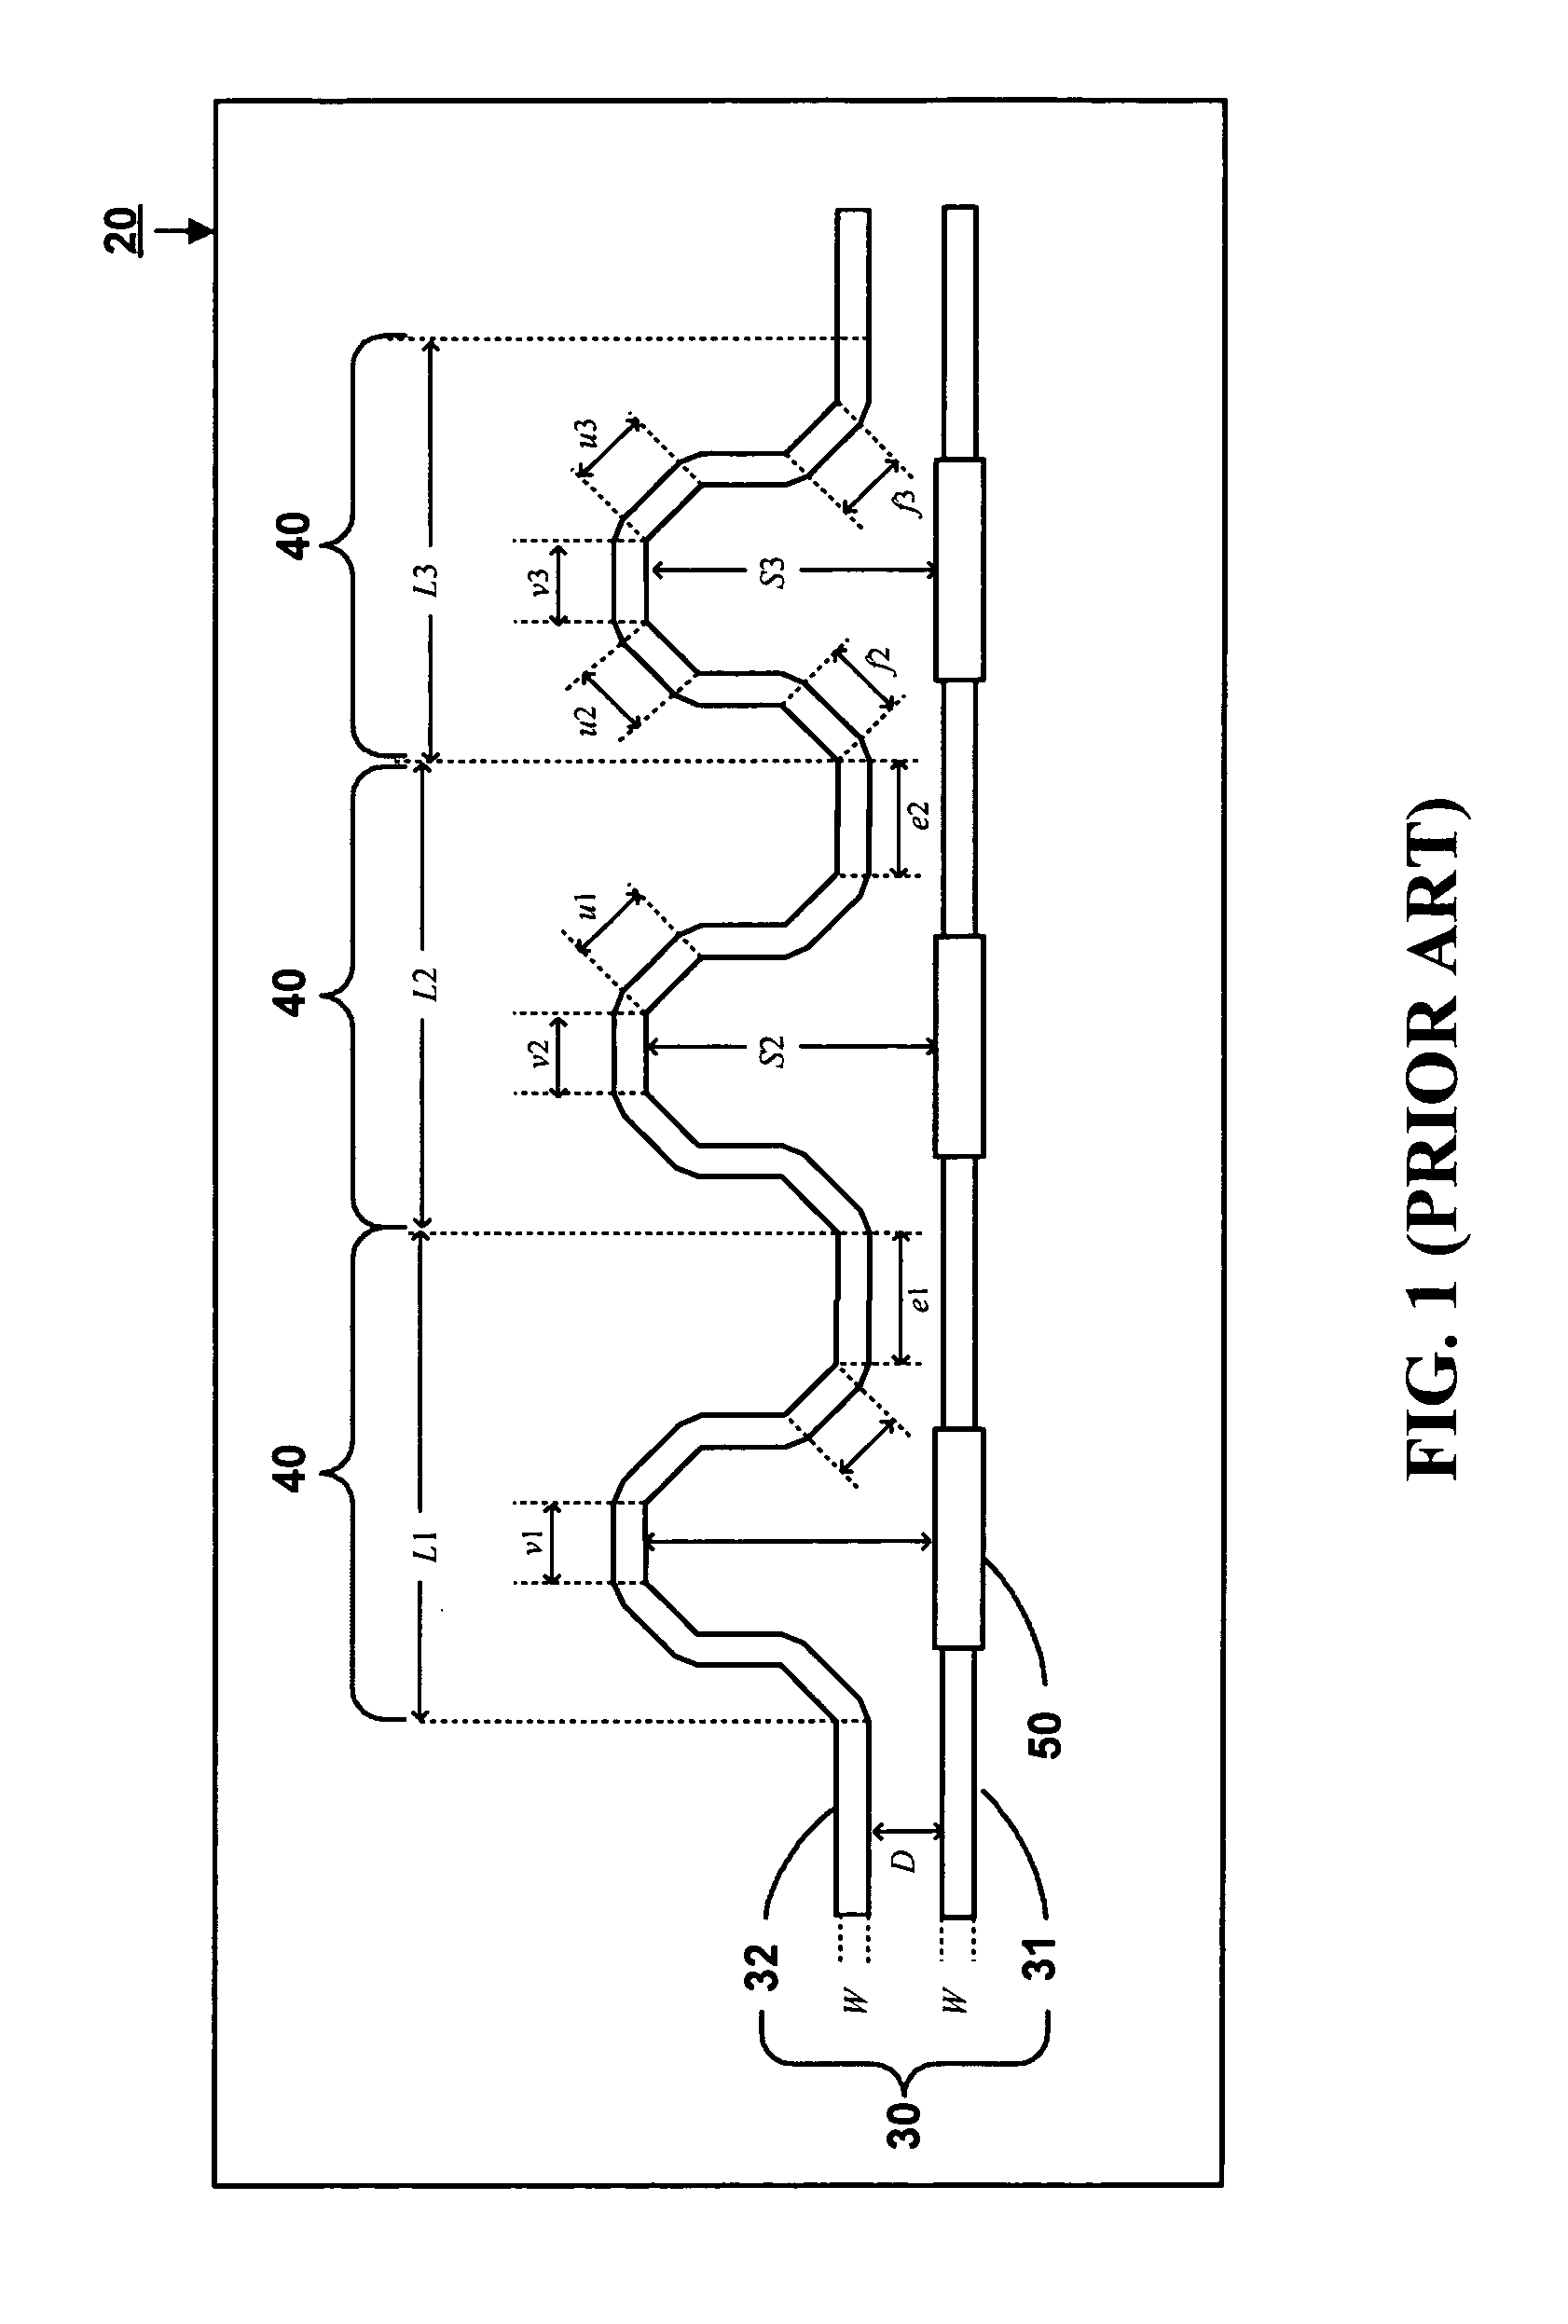 Computer aided wave-shaped circuit line drawing method and system